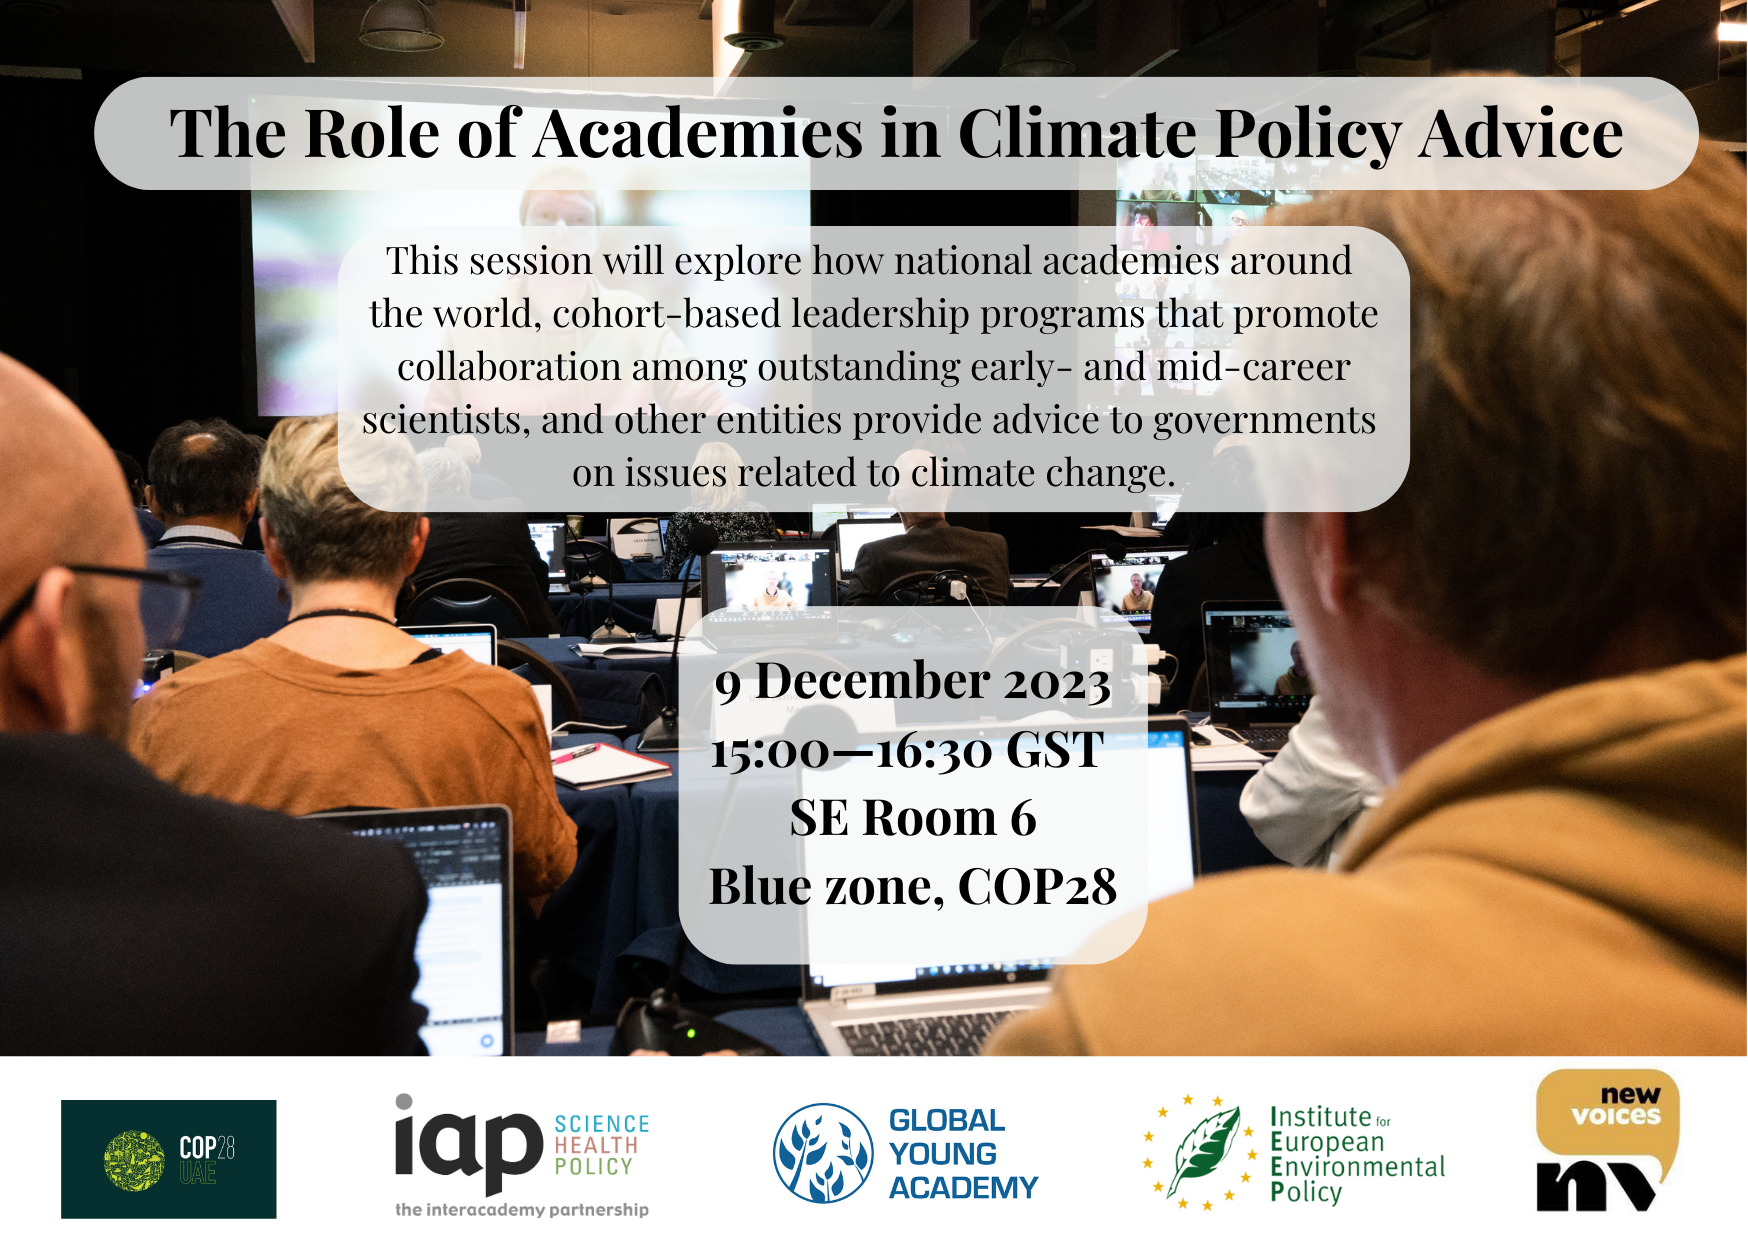 The Role of Academies in Climate Policy Advice